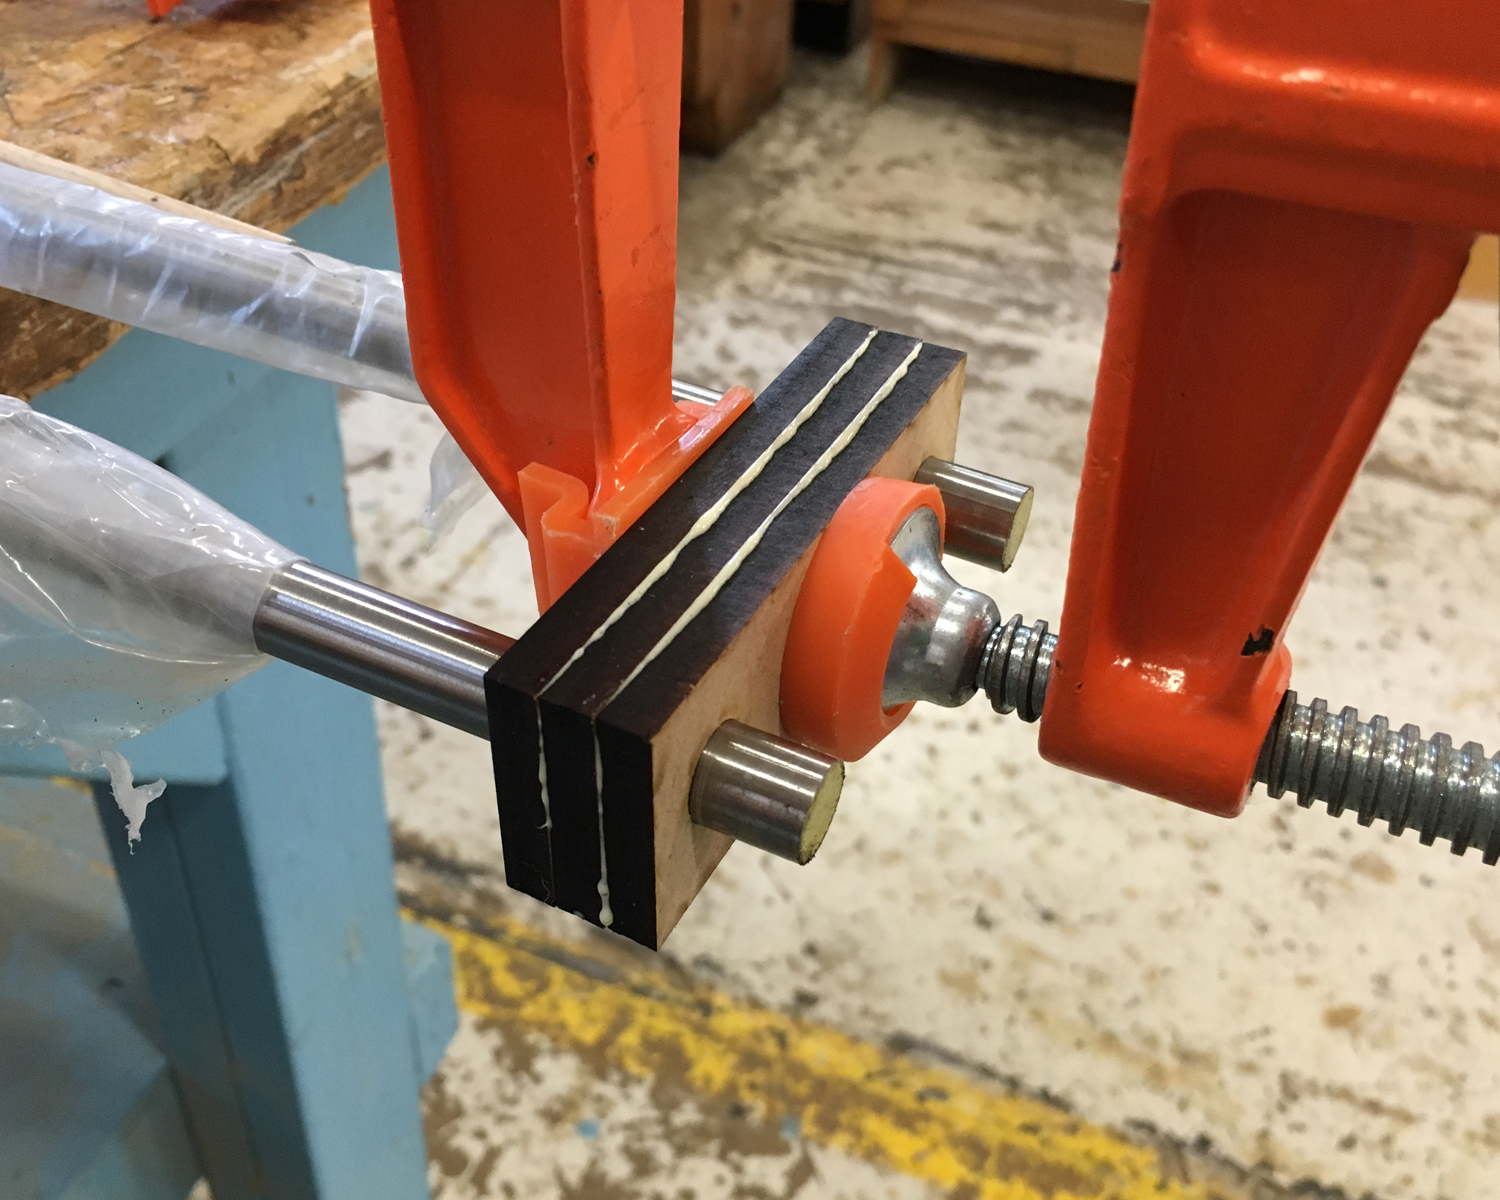 Bearing rod support. Bearing rods used for alignment during glueing